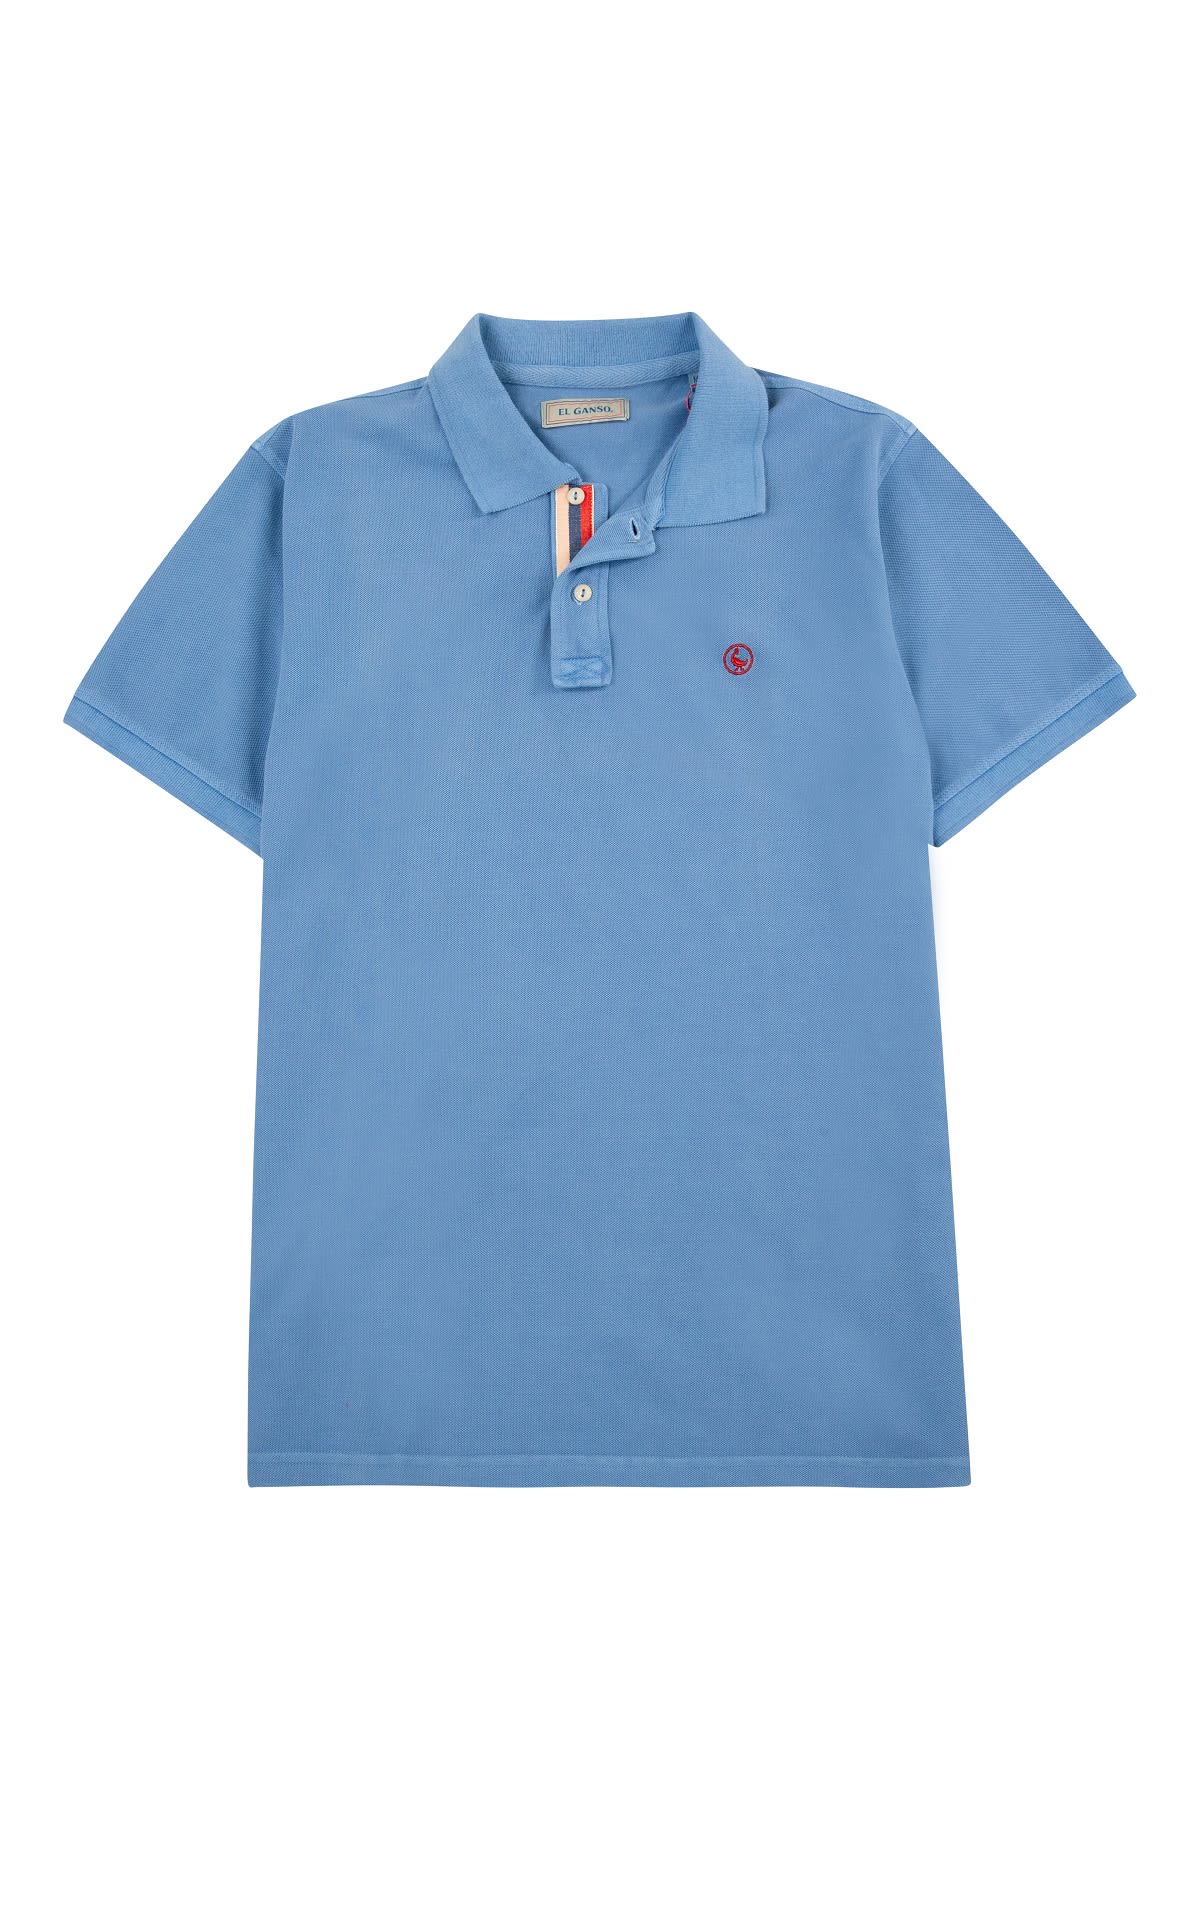 Blue polo shirt for men from El Ganso